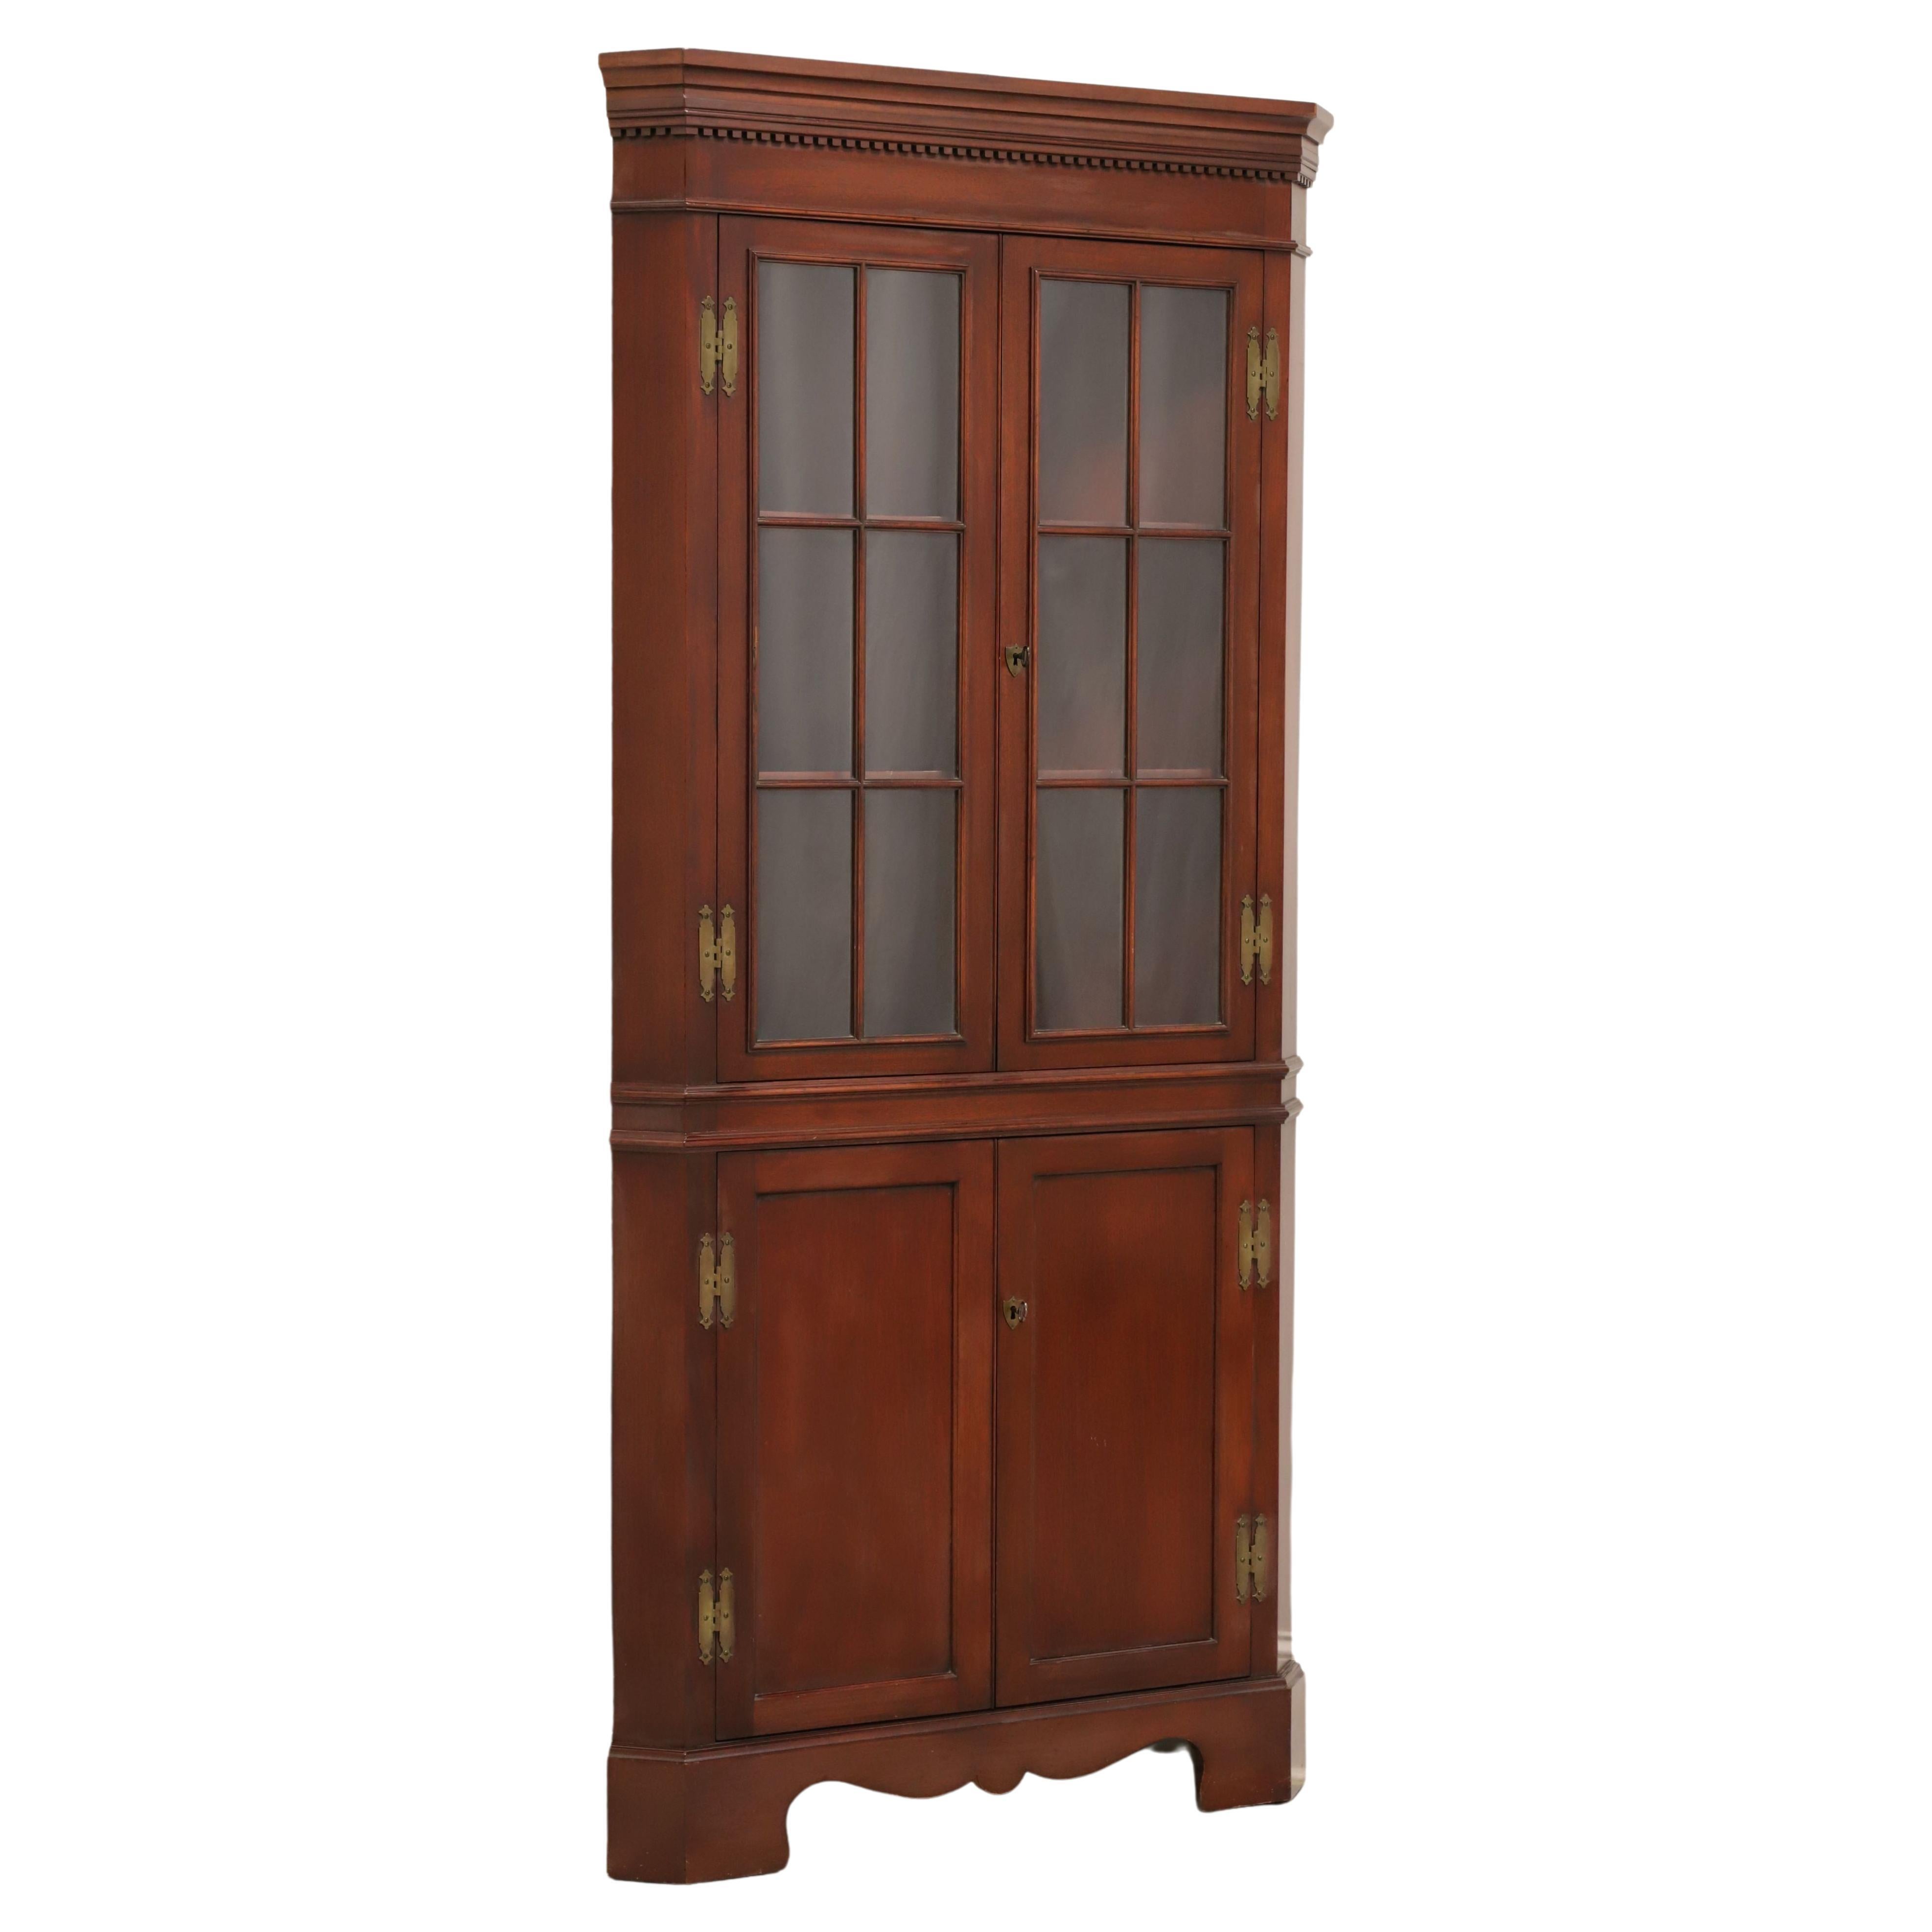 CRAFTIQUE Solid Mahogany Chippendale Style Corner Cupboard / Cabinet - B For Sale